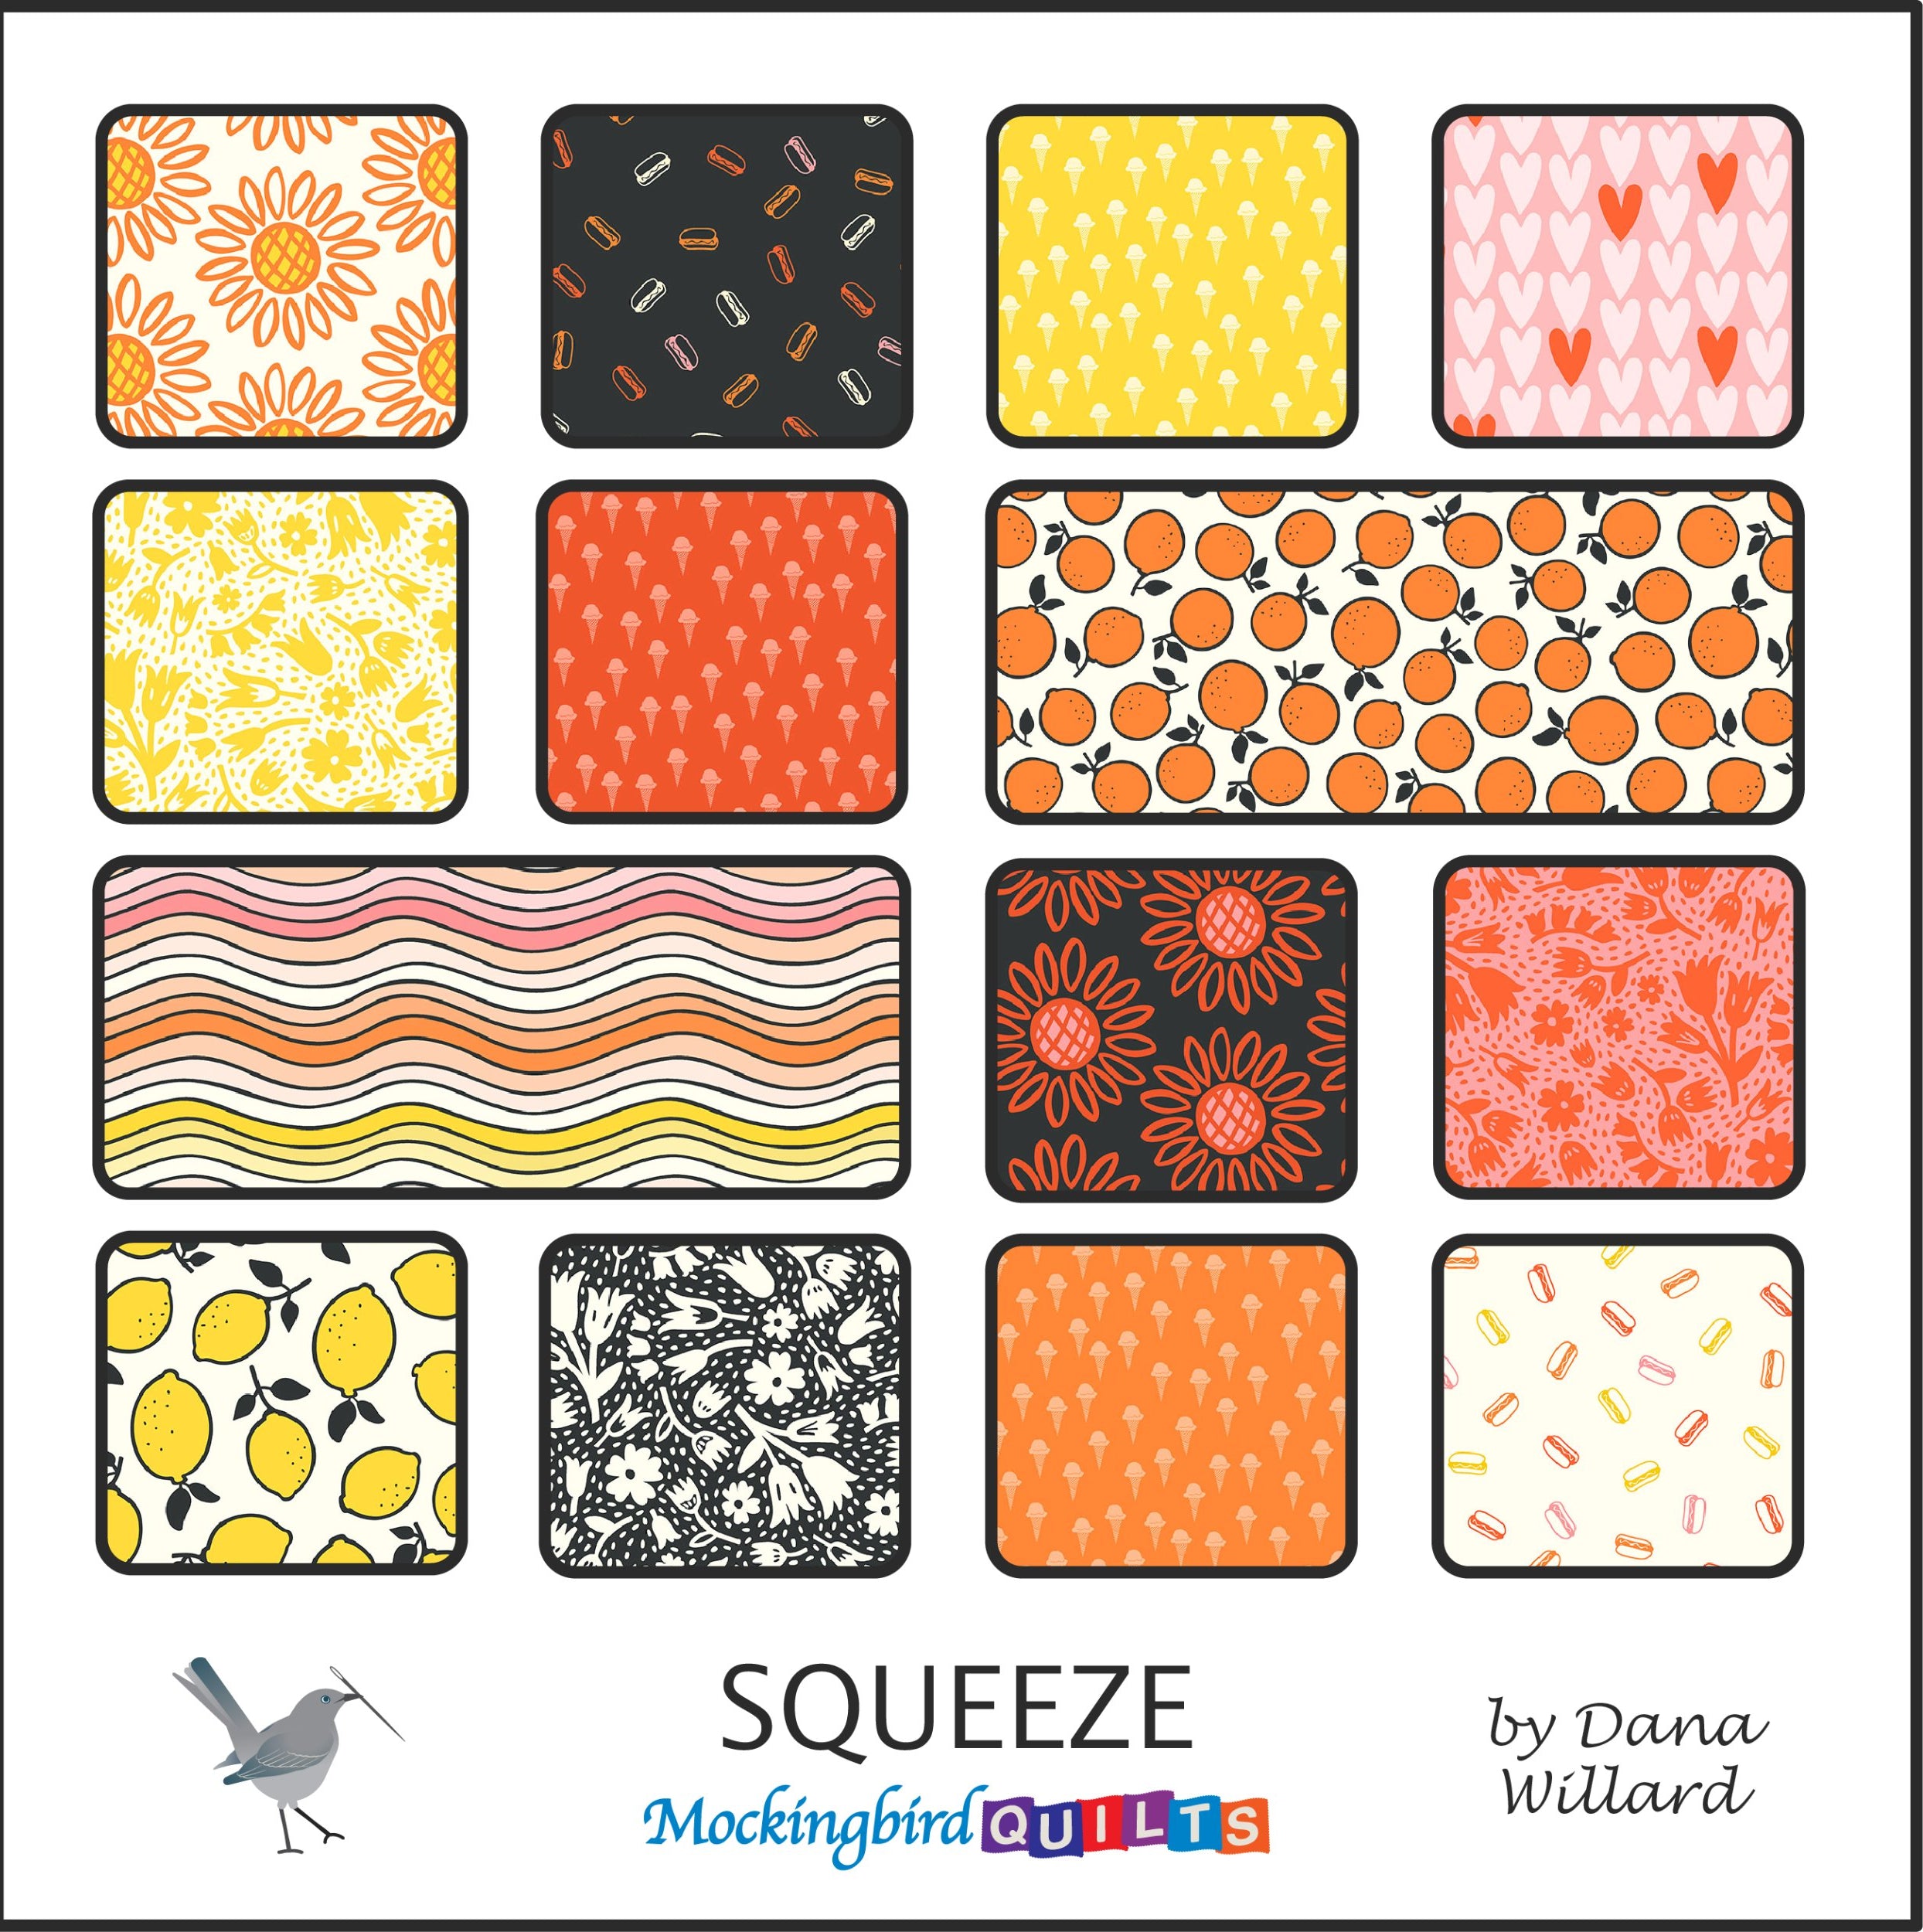 The image shows fifteen fabric swatches from the collection “Squeeze” by Dana Willard. The swatches are in bright, cheerful colors evocative of summertime, with prints of oranges, lemons, sunflowers, and more.